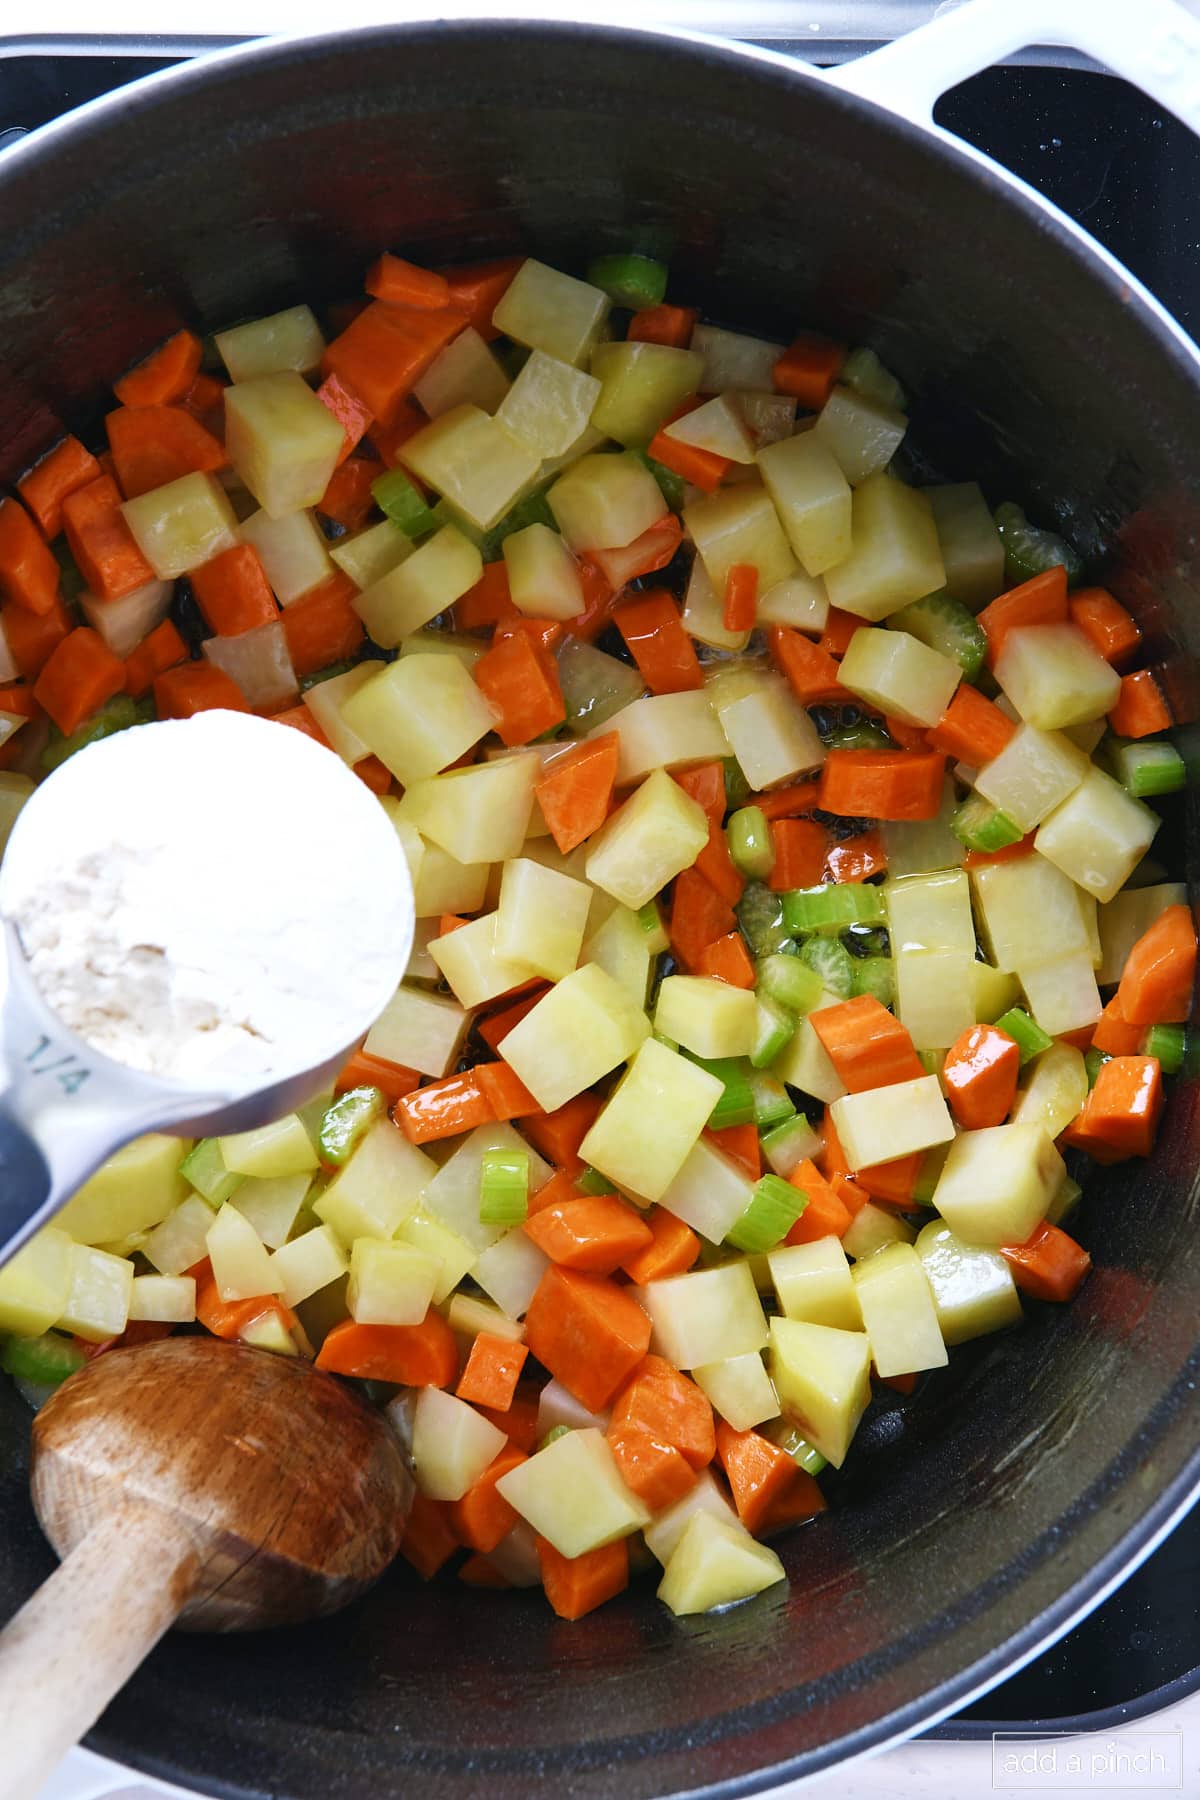 Flour adding to cooking potatoes, carrots, and celery in a dutch oven.